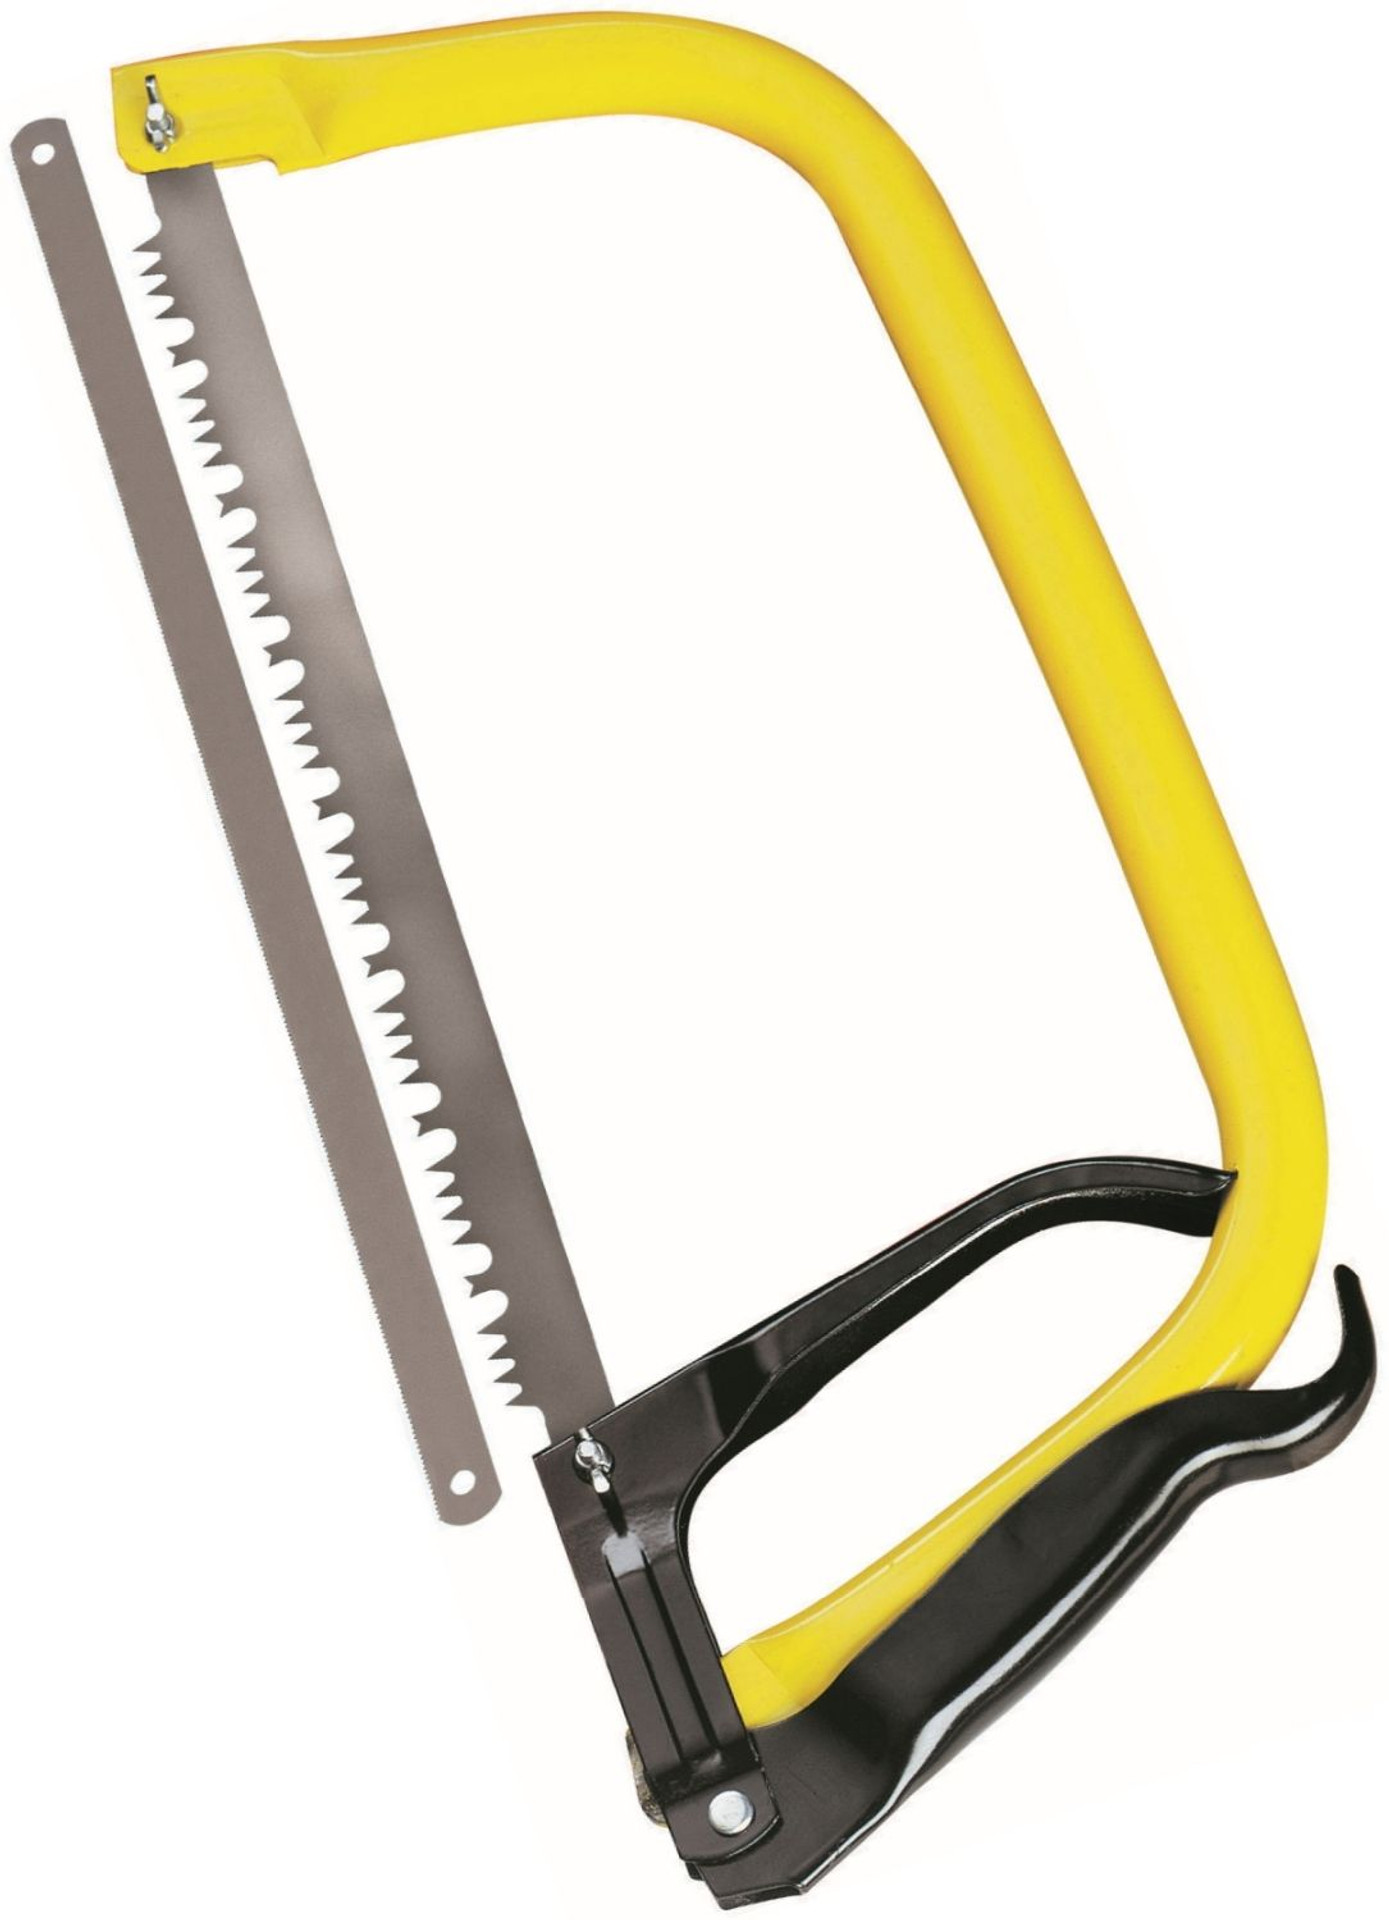 Stanley Bow Saw 300mm(12") | Home Hardware Direct